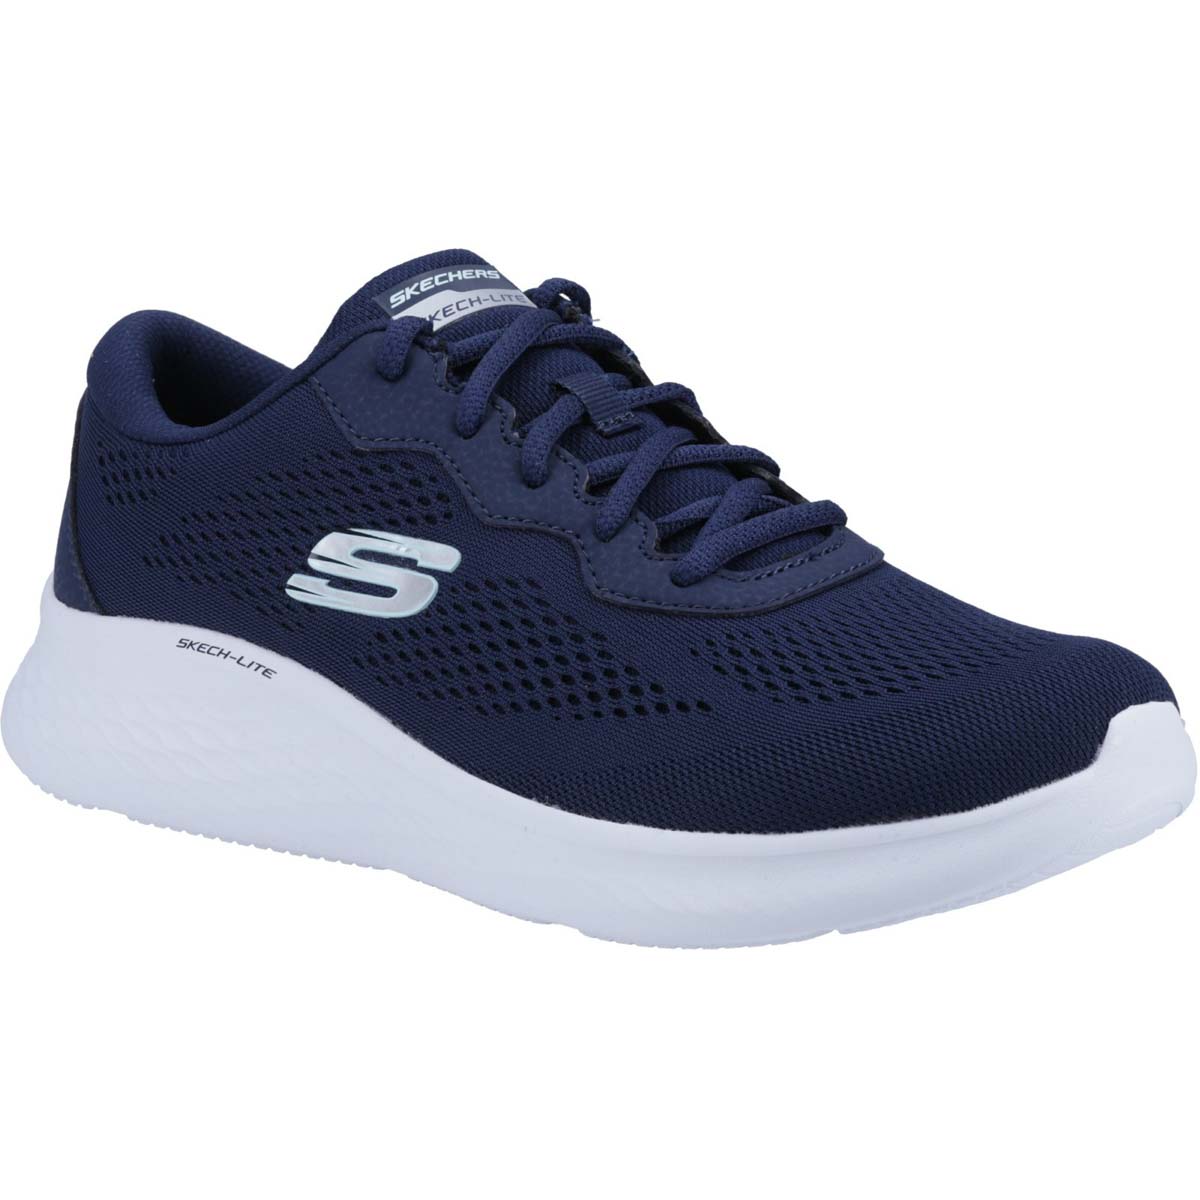 Skechers Skech-lite Pro NVY Navy Womens trainers in a Plain Textile in Size 4